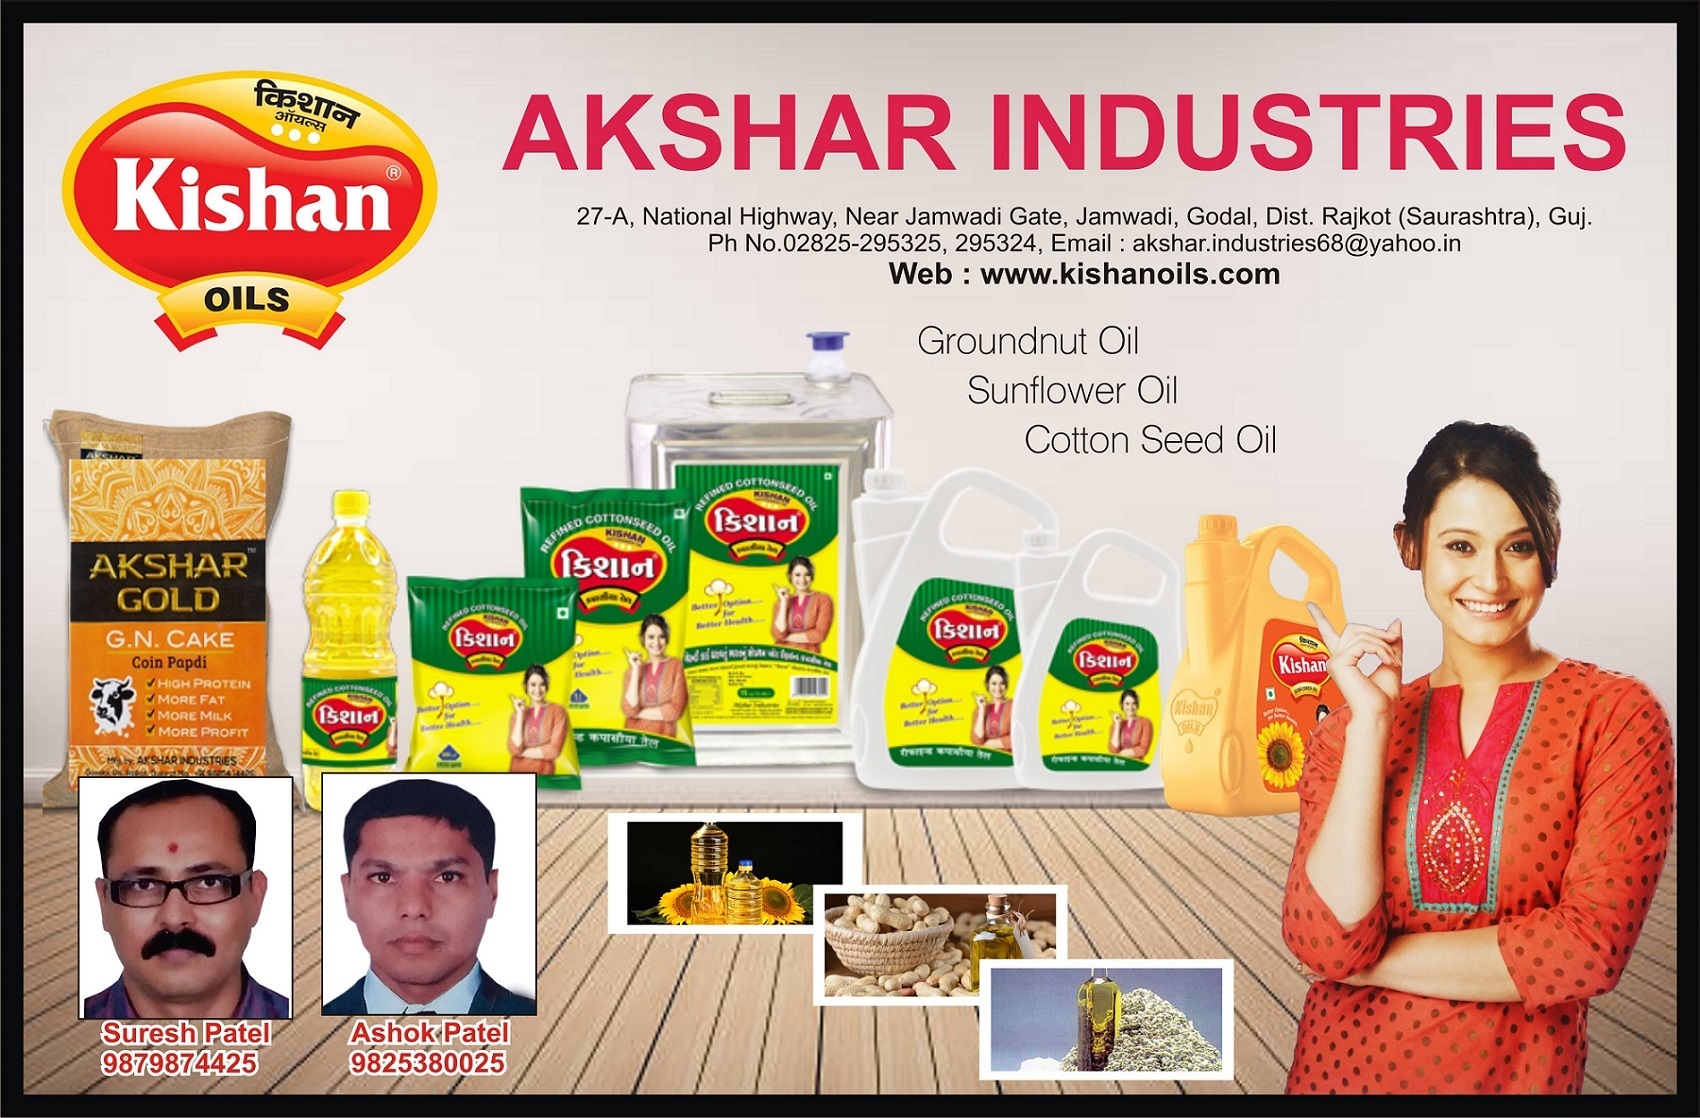 Akshar Industries - Manufacturer Of Groundnut, Sunflower And Cotton Seed Oil